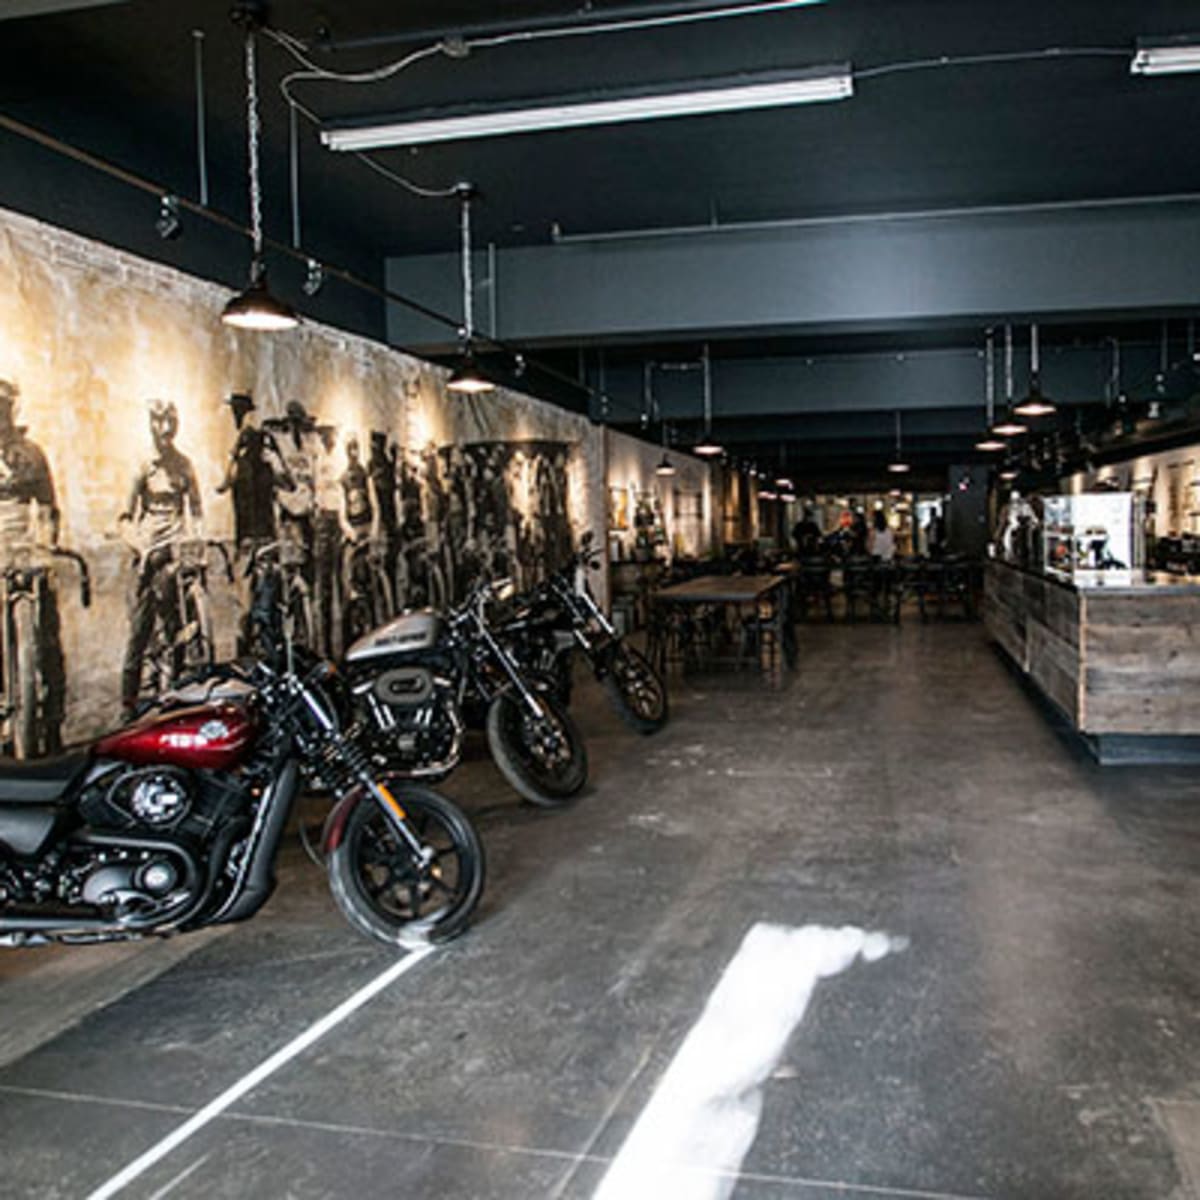 Harley Davidson Opens A Cool Biker Themed Cafe Take That Starbucks Thestreet